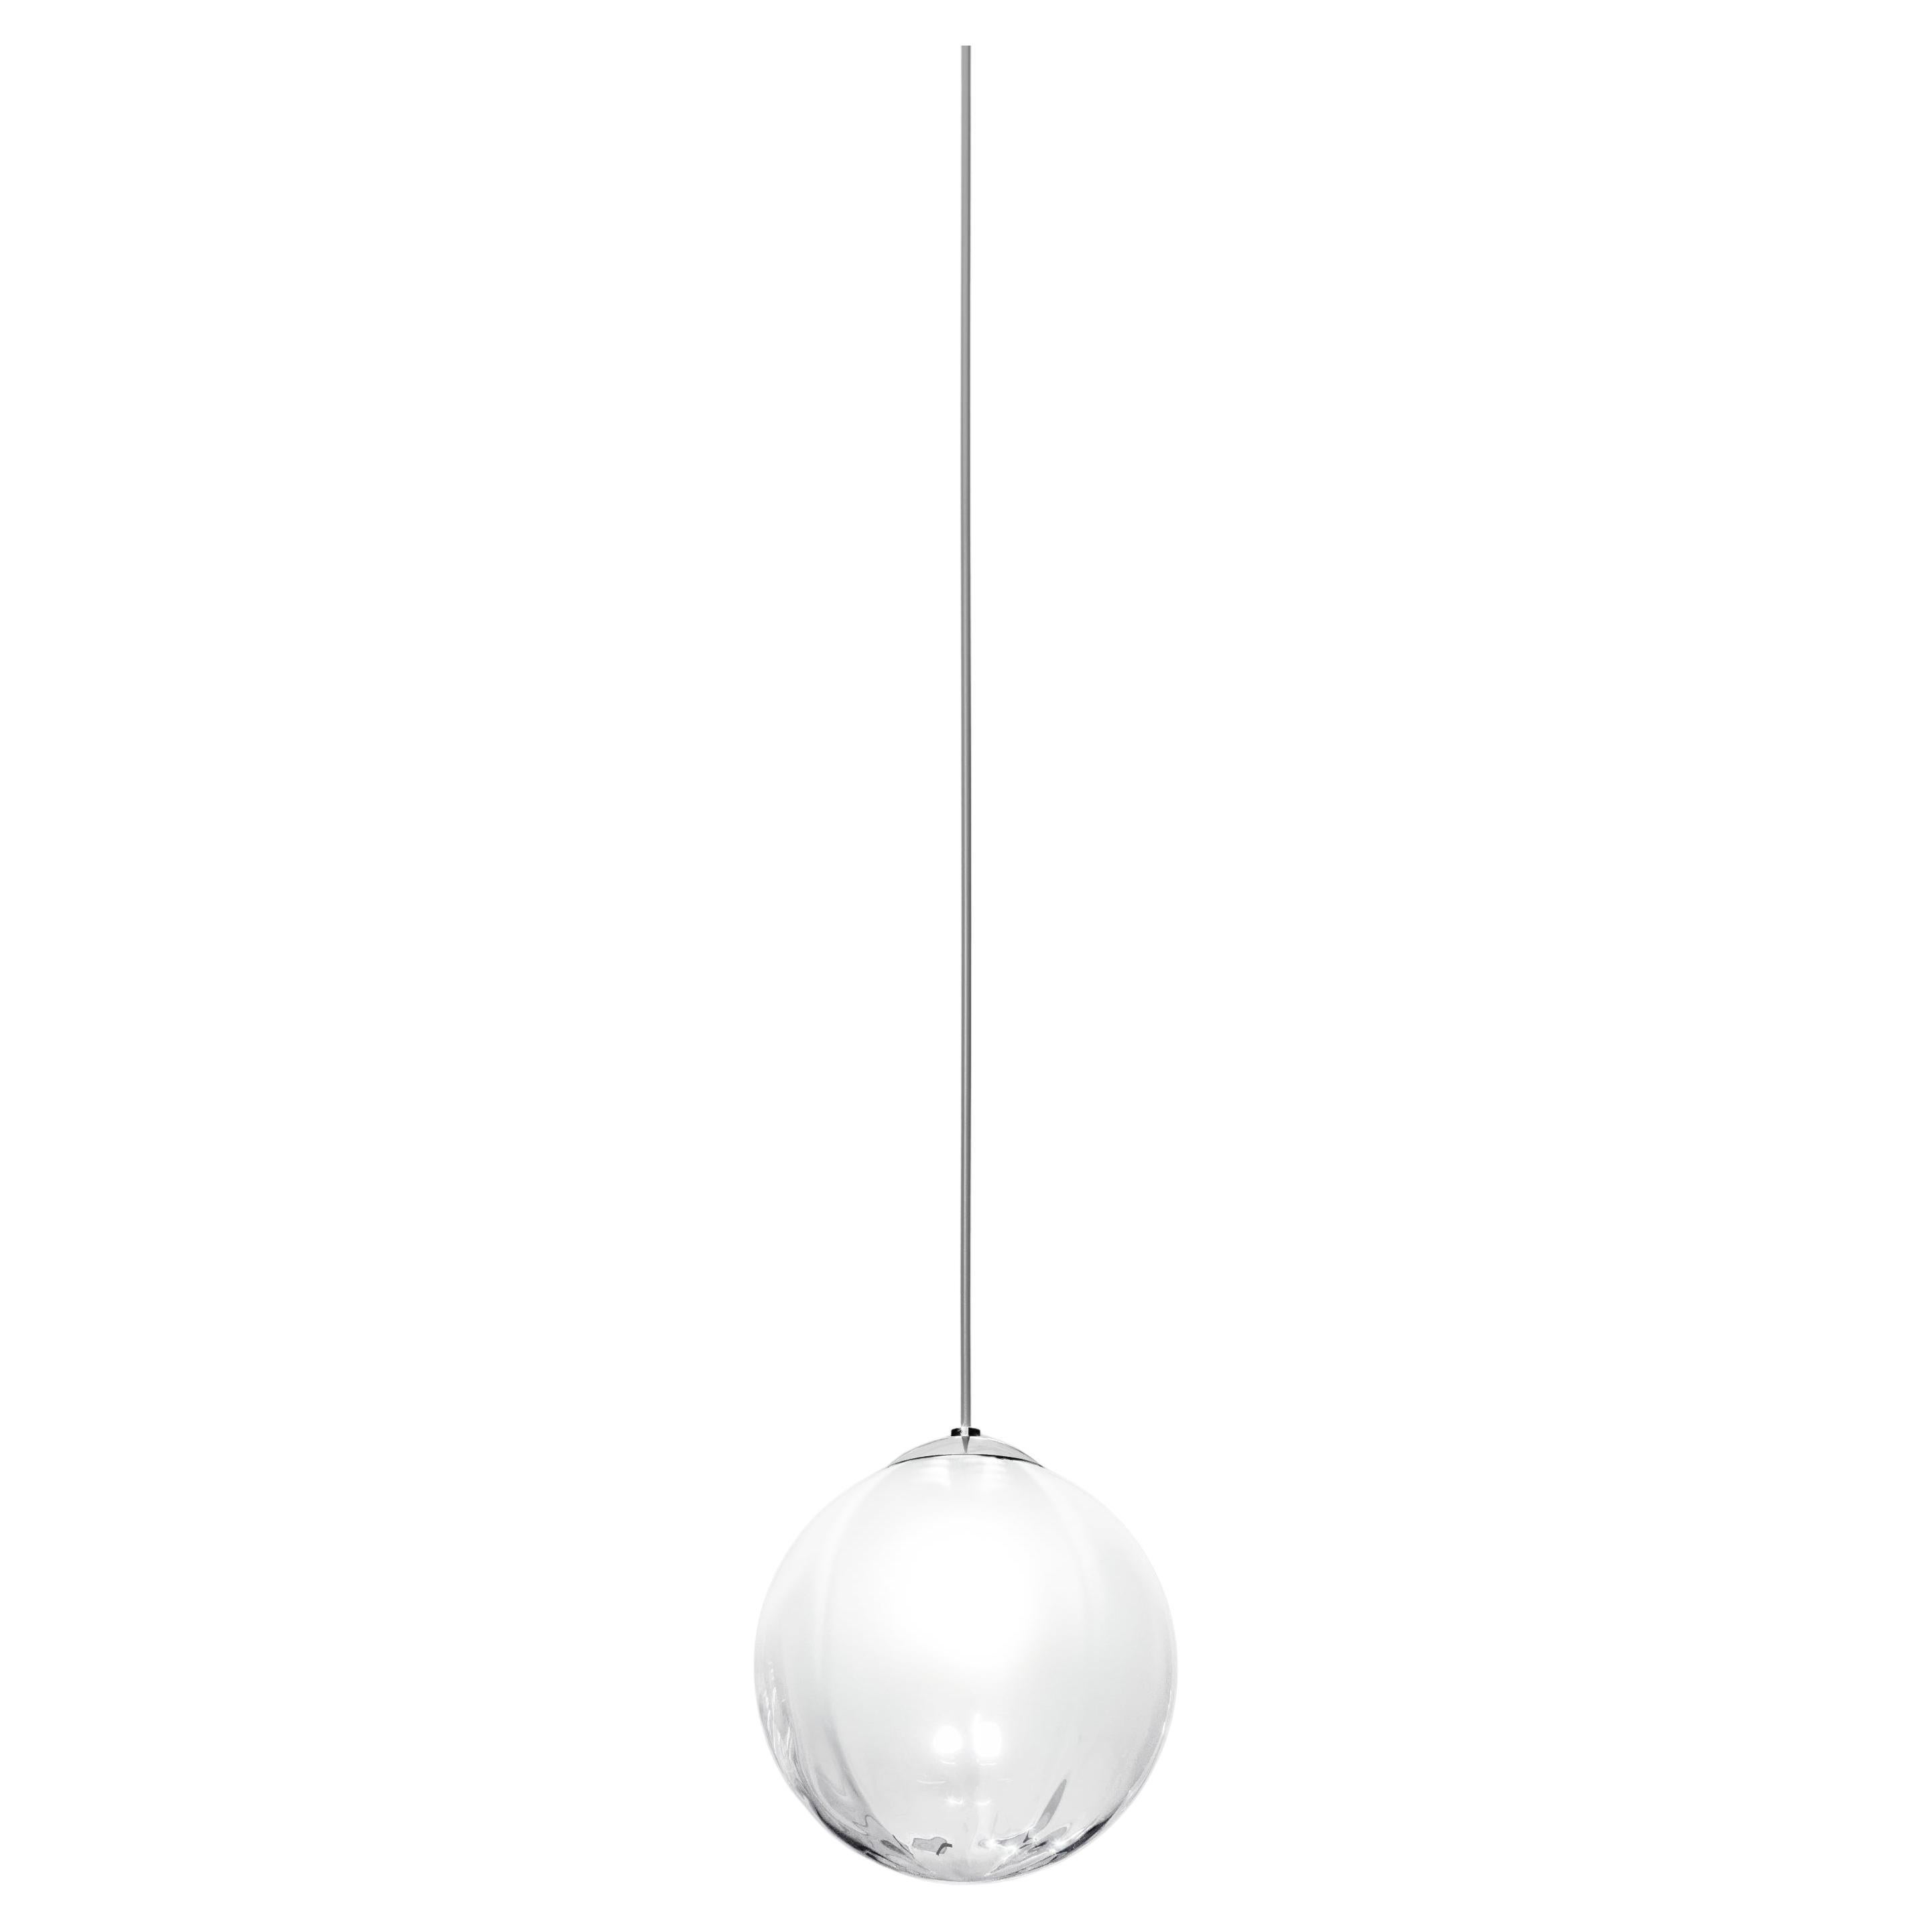 Vistosi Puppet Pendant Light in White Shaded Glass And Glossy Chrome Frame